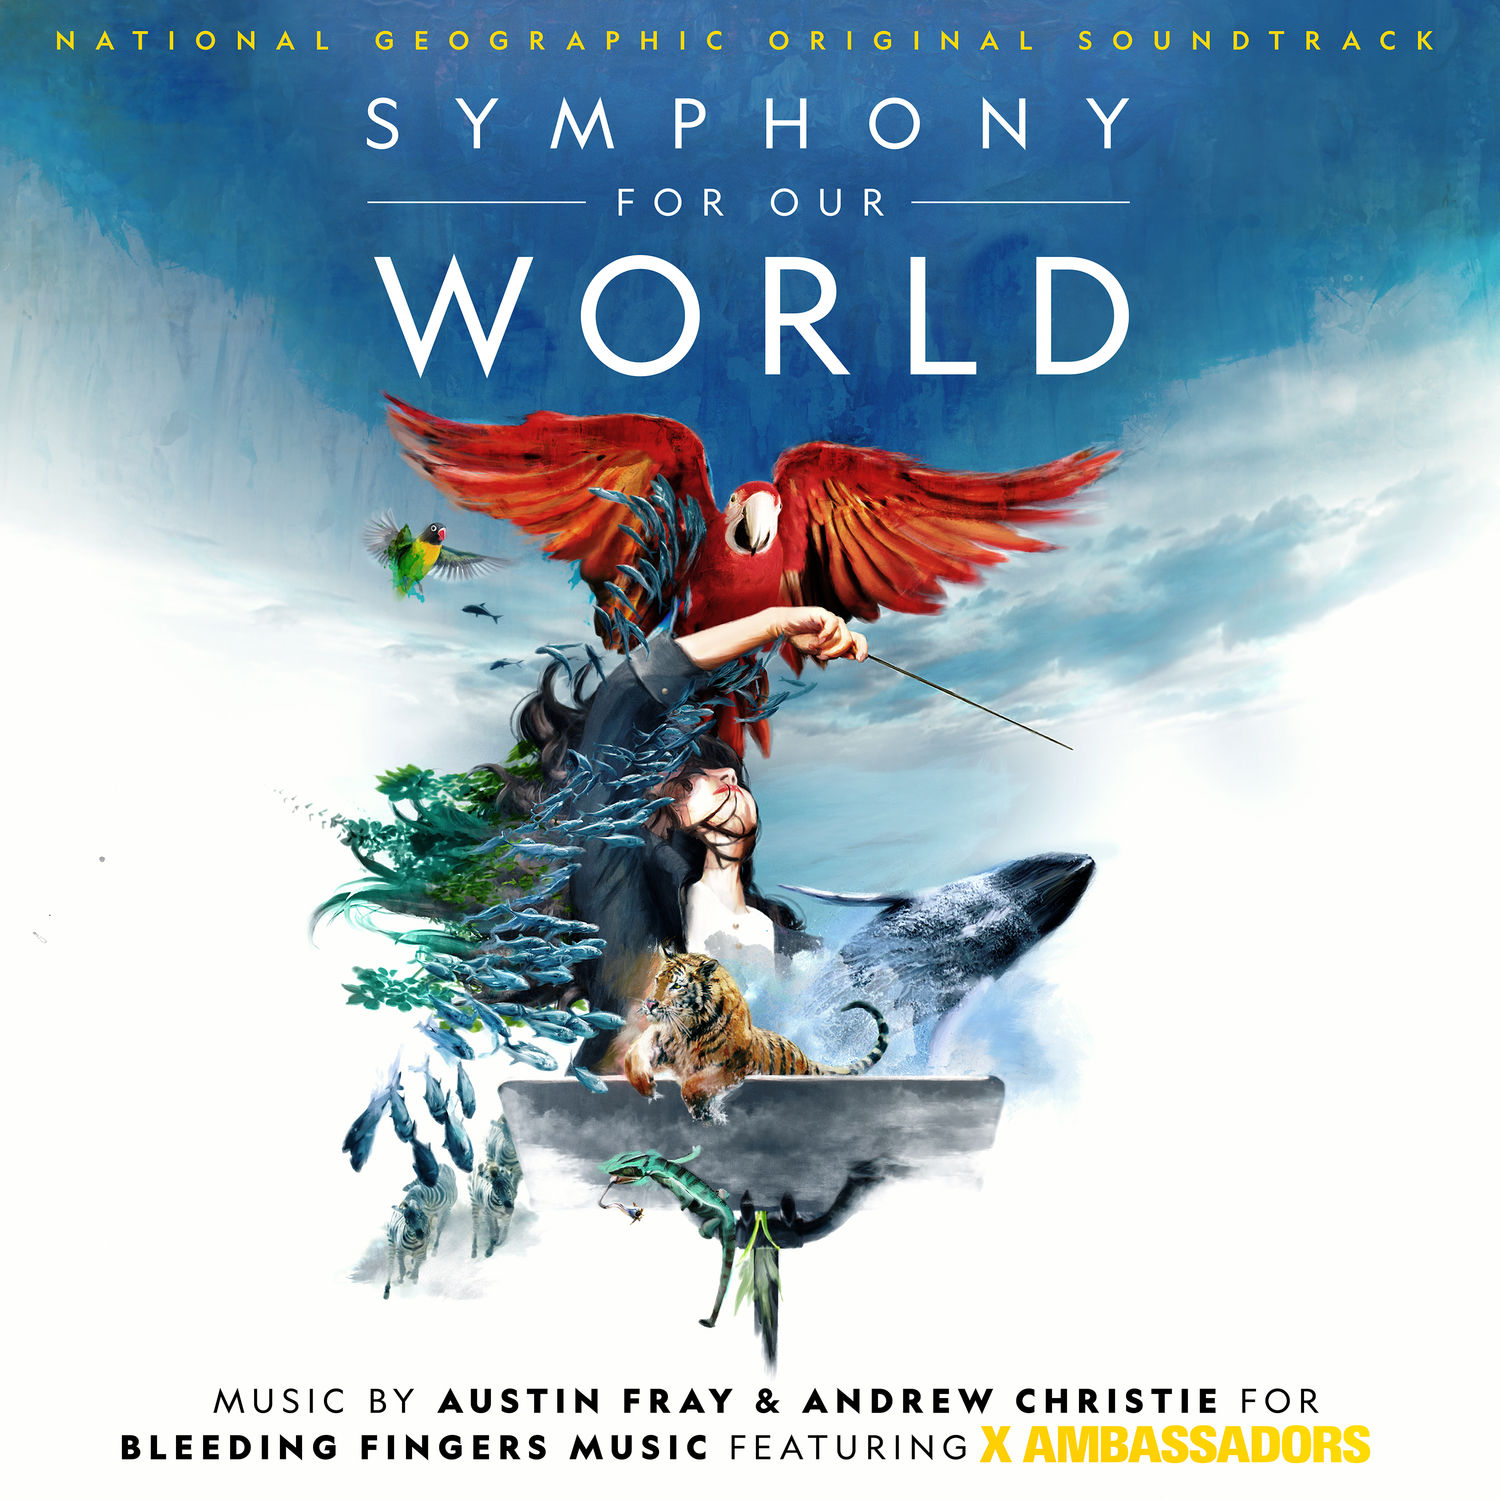 Art for Symphony for Our World (feat. X Ambassadors) by Austin Fray